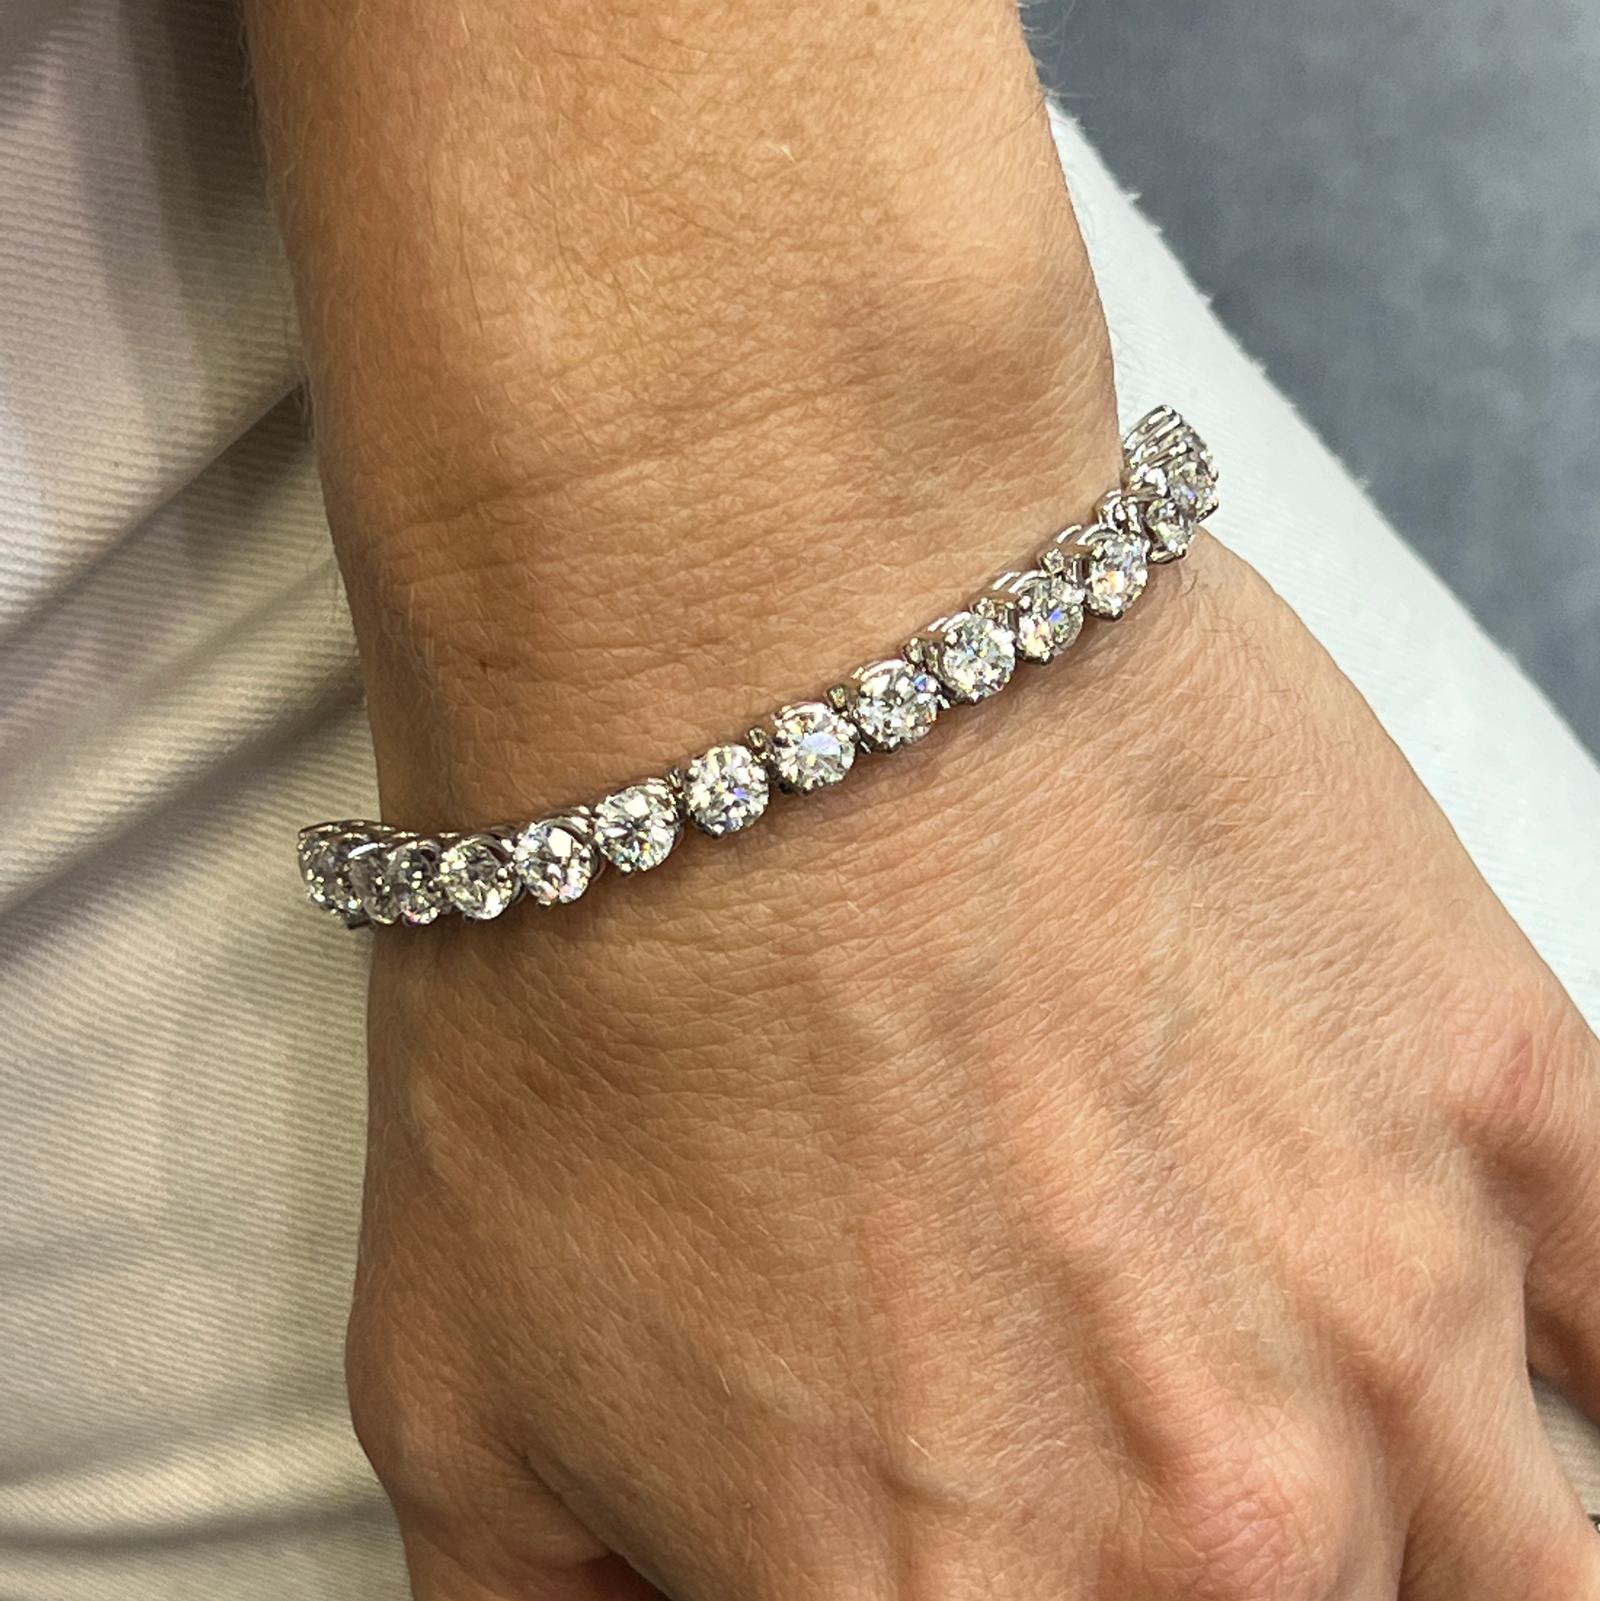 Impressive diamond tennis bracelet fashioned in 18 karat white gold. The bracelet features 34 round brilliant cut diamonds (each diamond weighs approximately .50 carat.) The 34 diamonds weigh 17.34 CTW and are graded E-F color and SI clarity. The